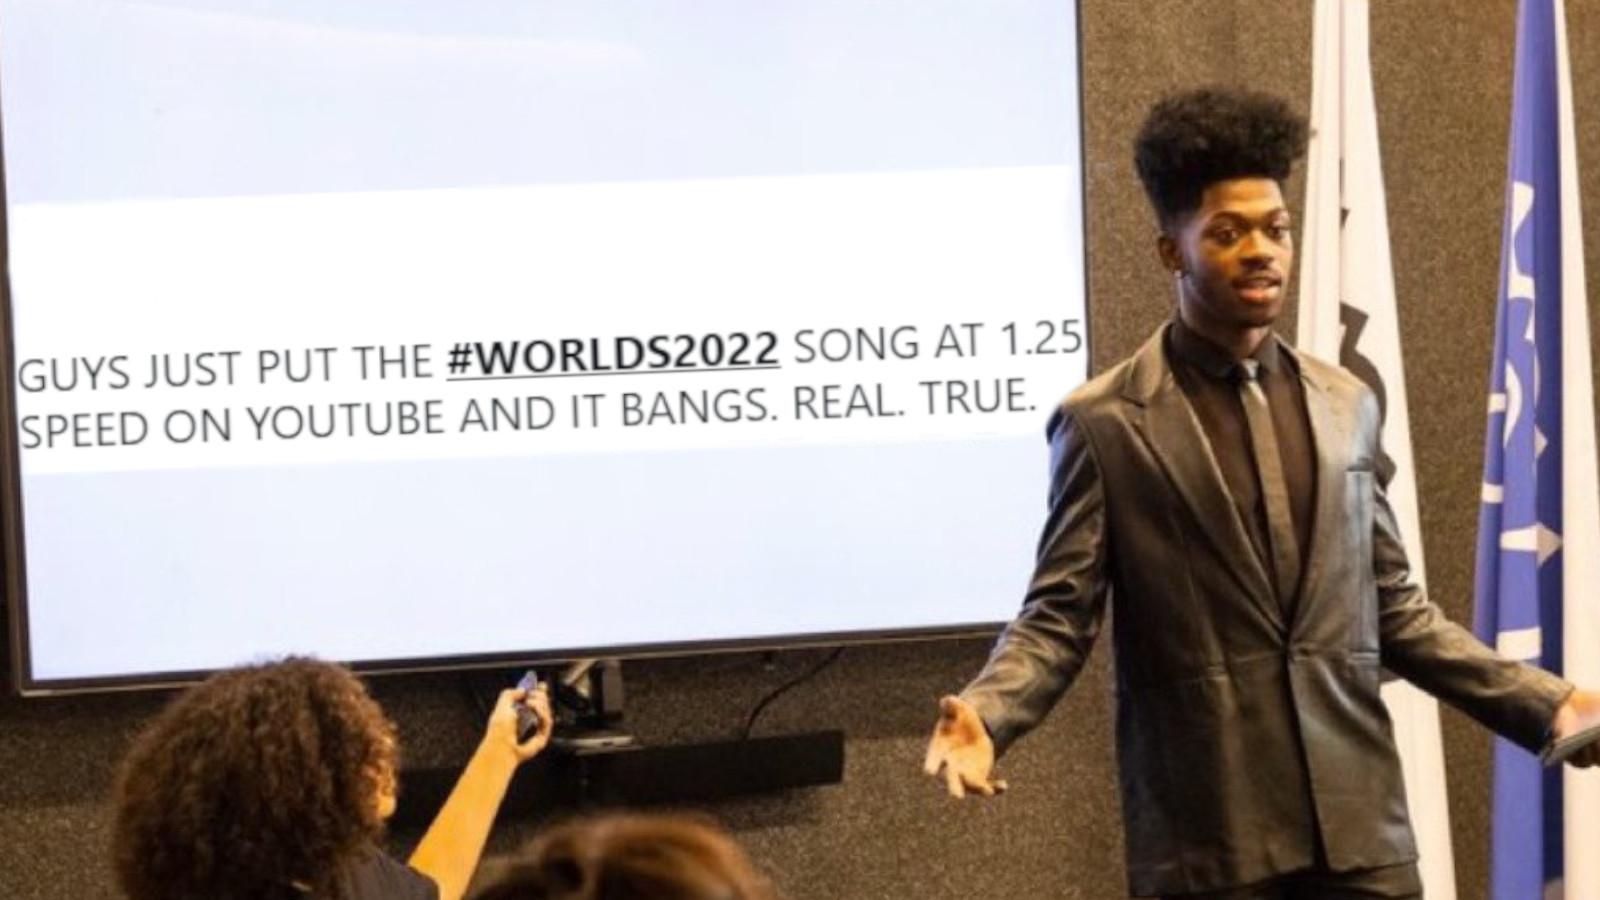 Everything We Know About Riot Games' Collaboration With Lil Nas X